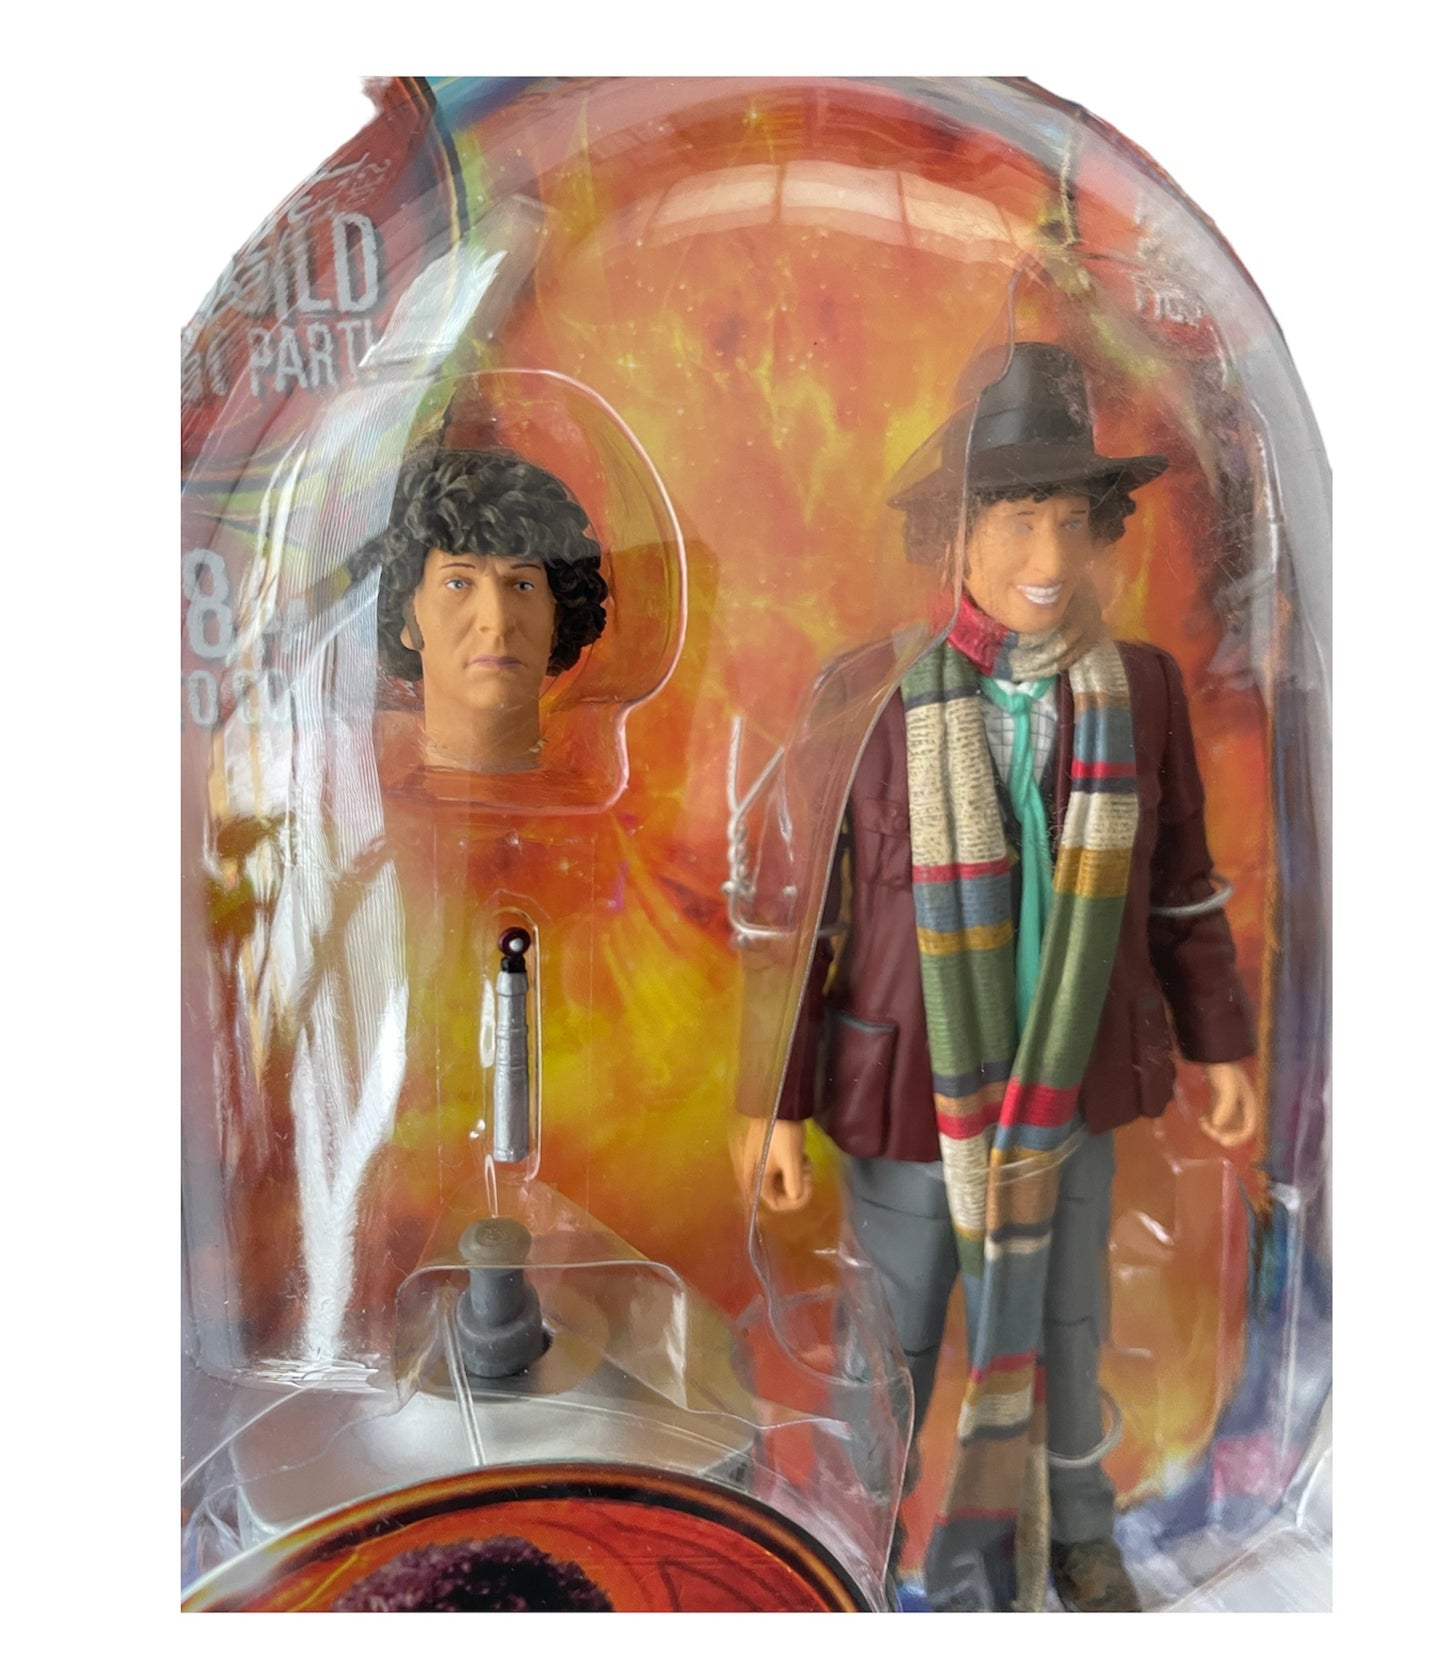 Vintage 1997 Dr Who Classic Series - The Fourth Doctor Action Figure With Sonic Screwdriver And Swapable Head - With K1 Robot Part - Brand New Factory Sealed Shop Stock Room Find